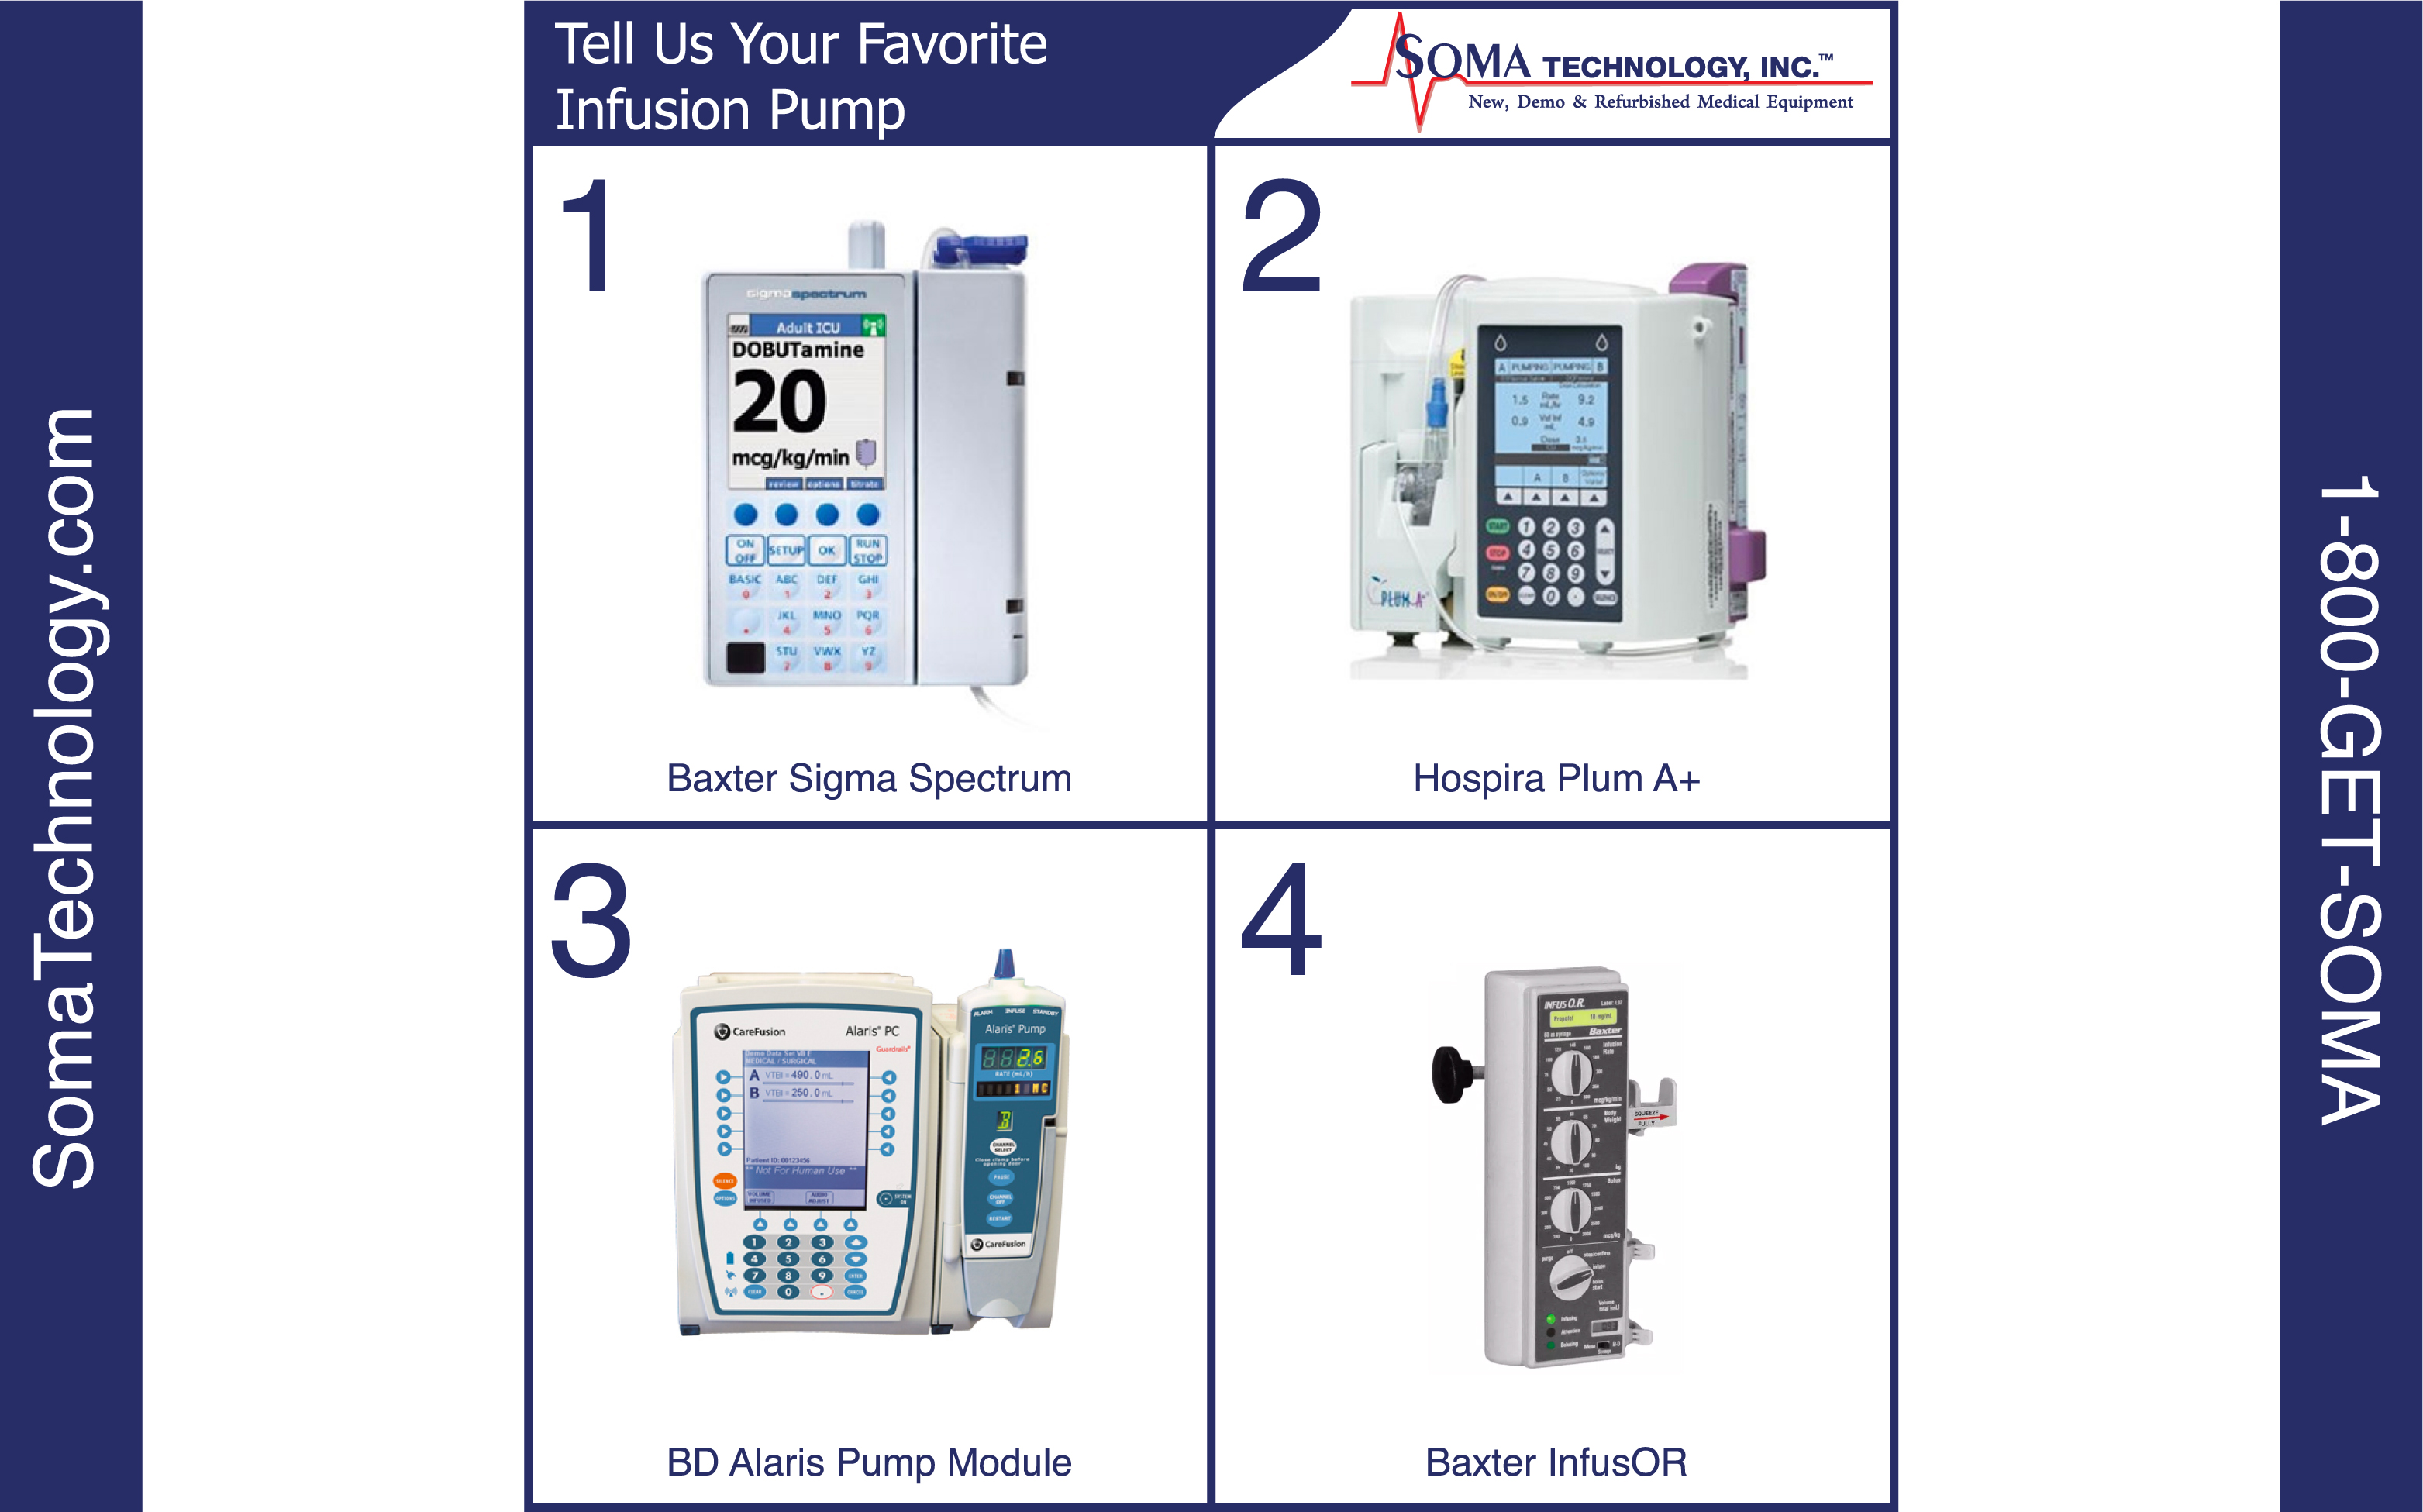 Tell us Your Favorite Infusion Pump - Soma Technology, Inc.